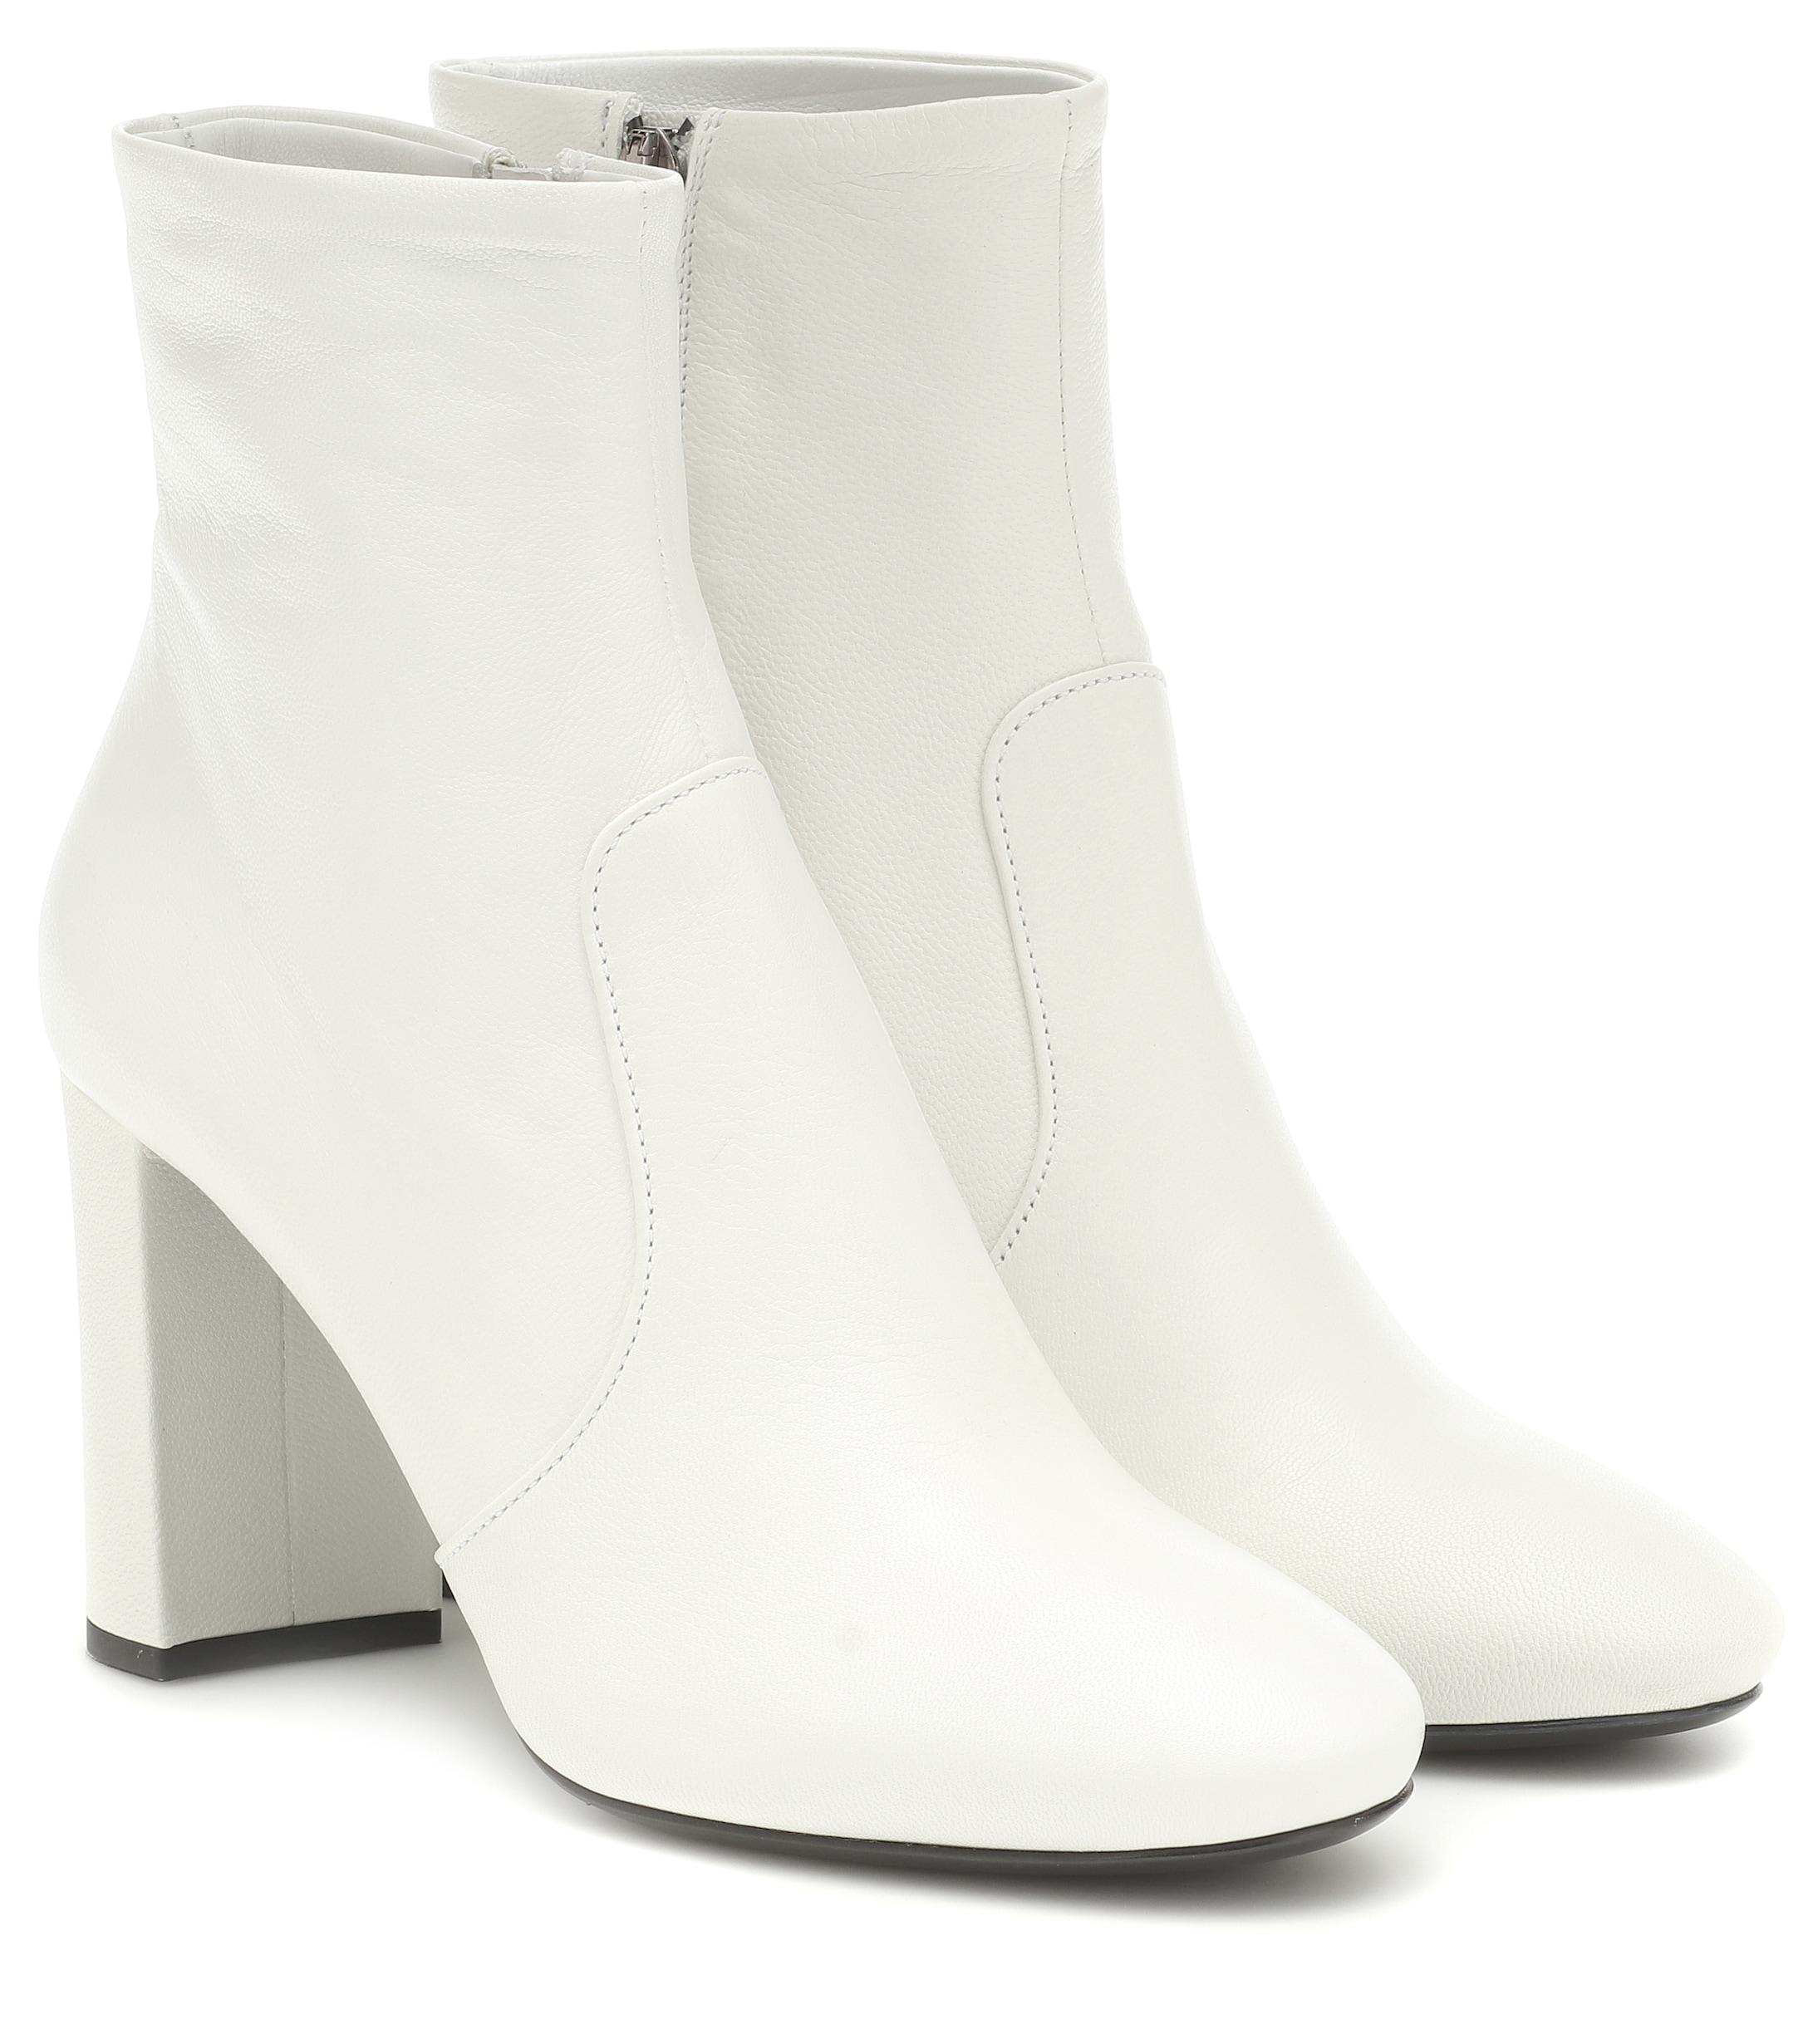 Prada Leather Ankle Boots in White - Lyst